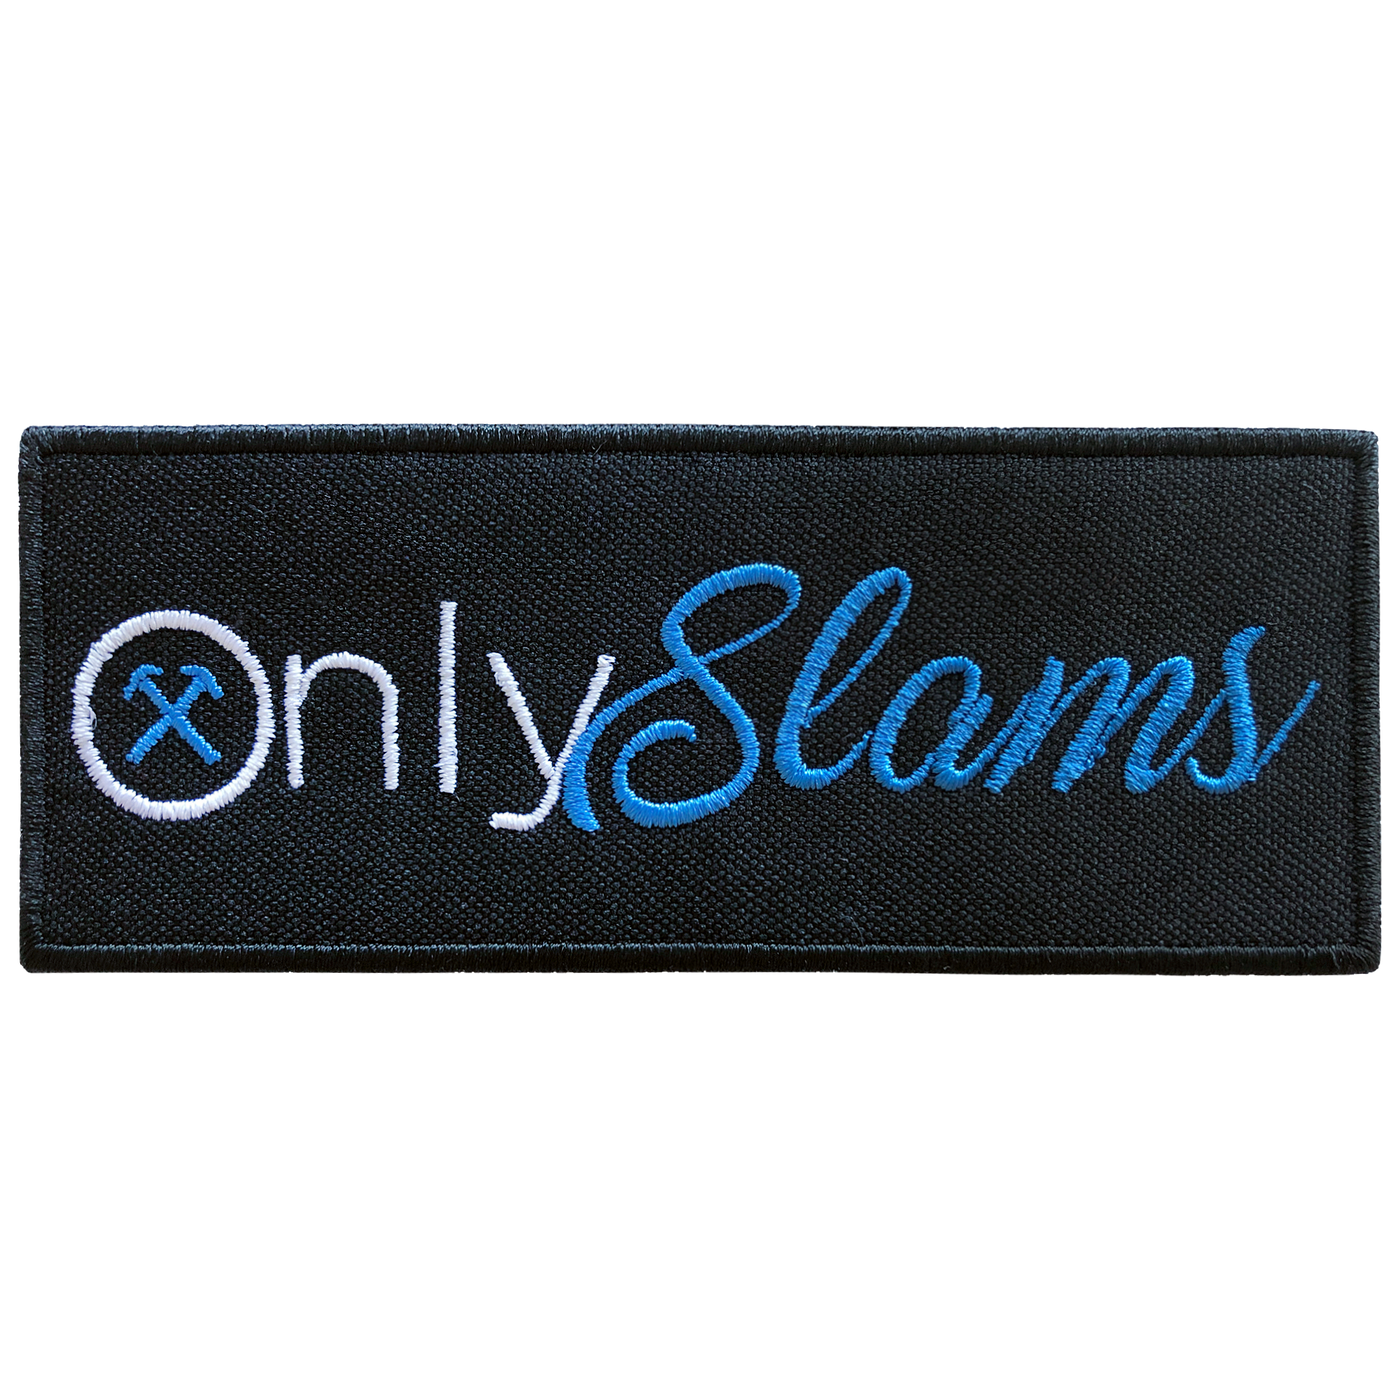 Only Slams Patch